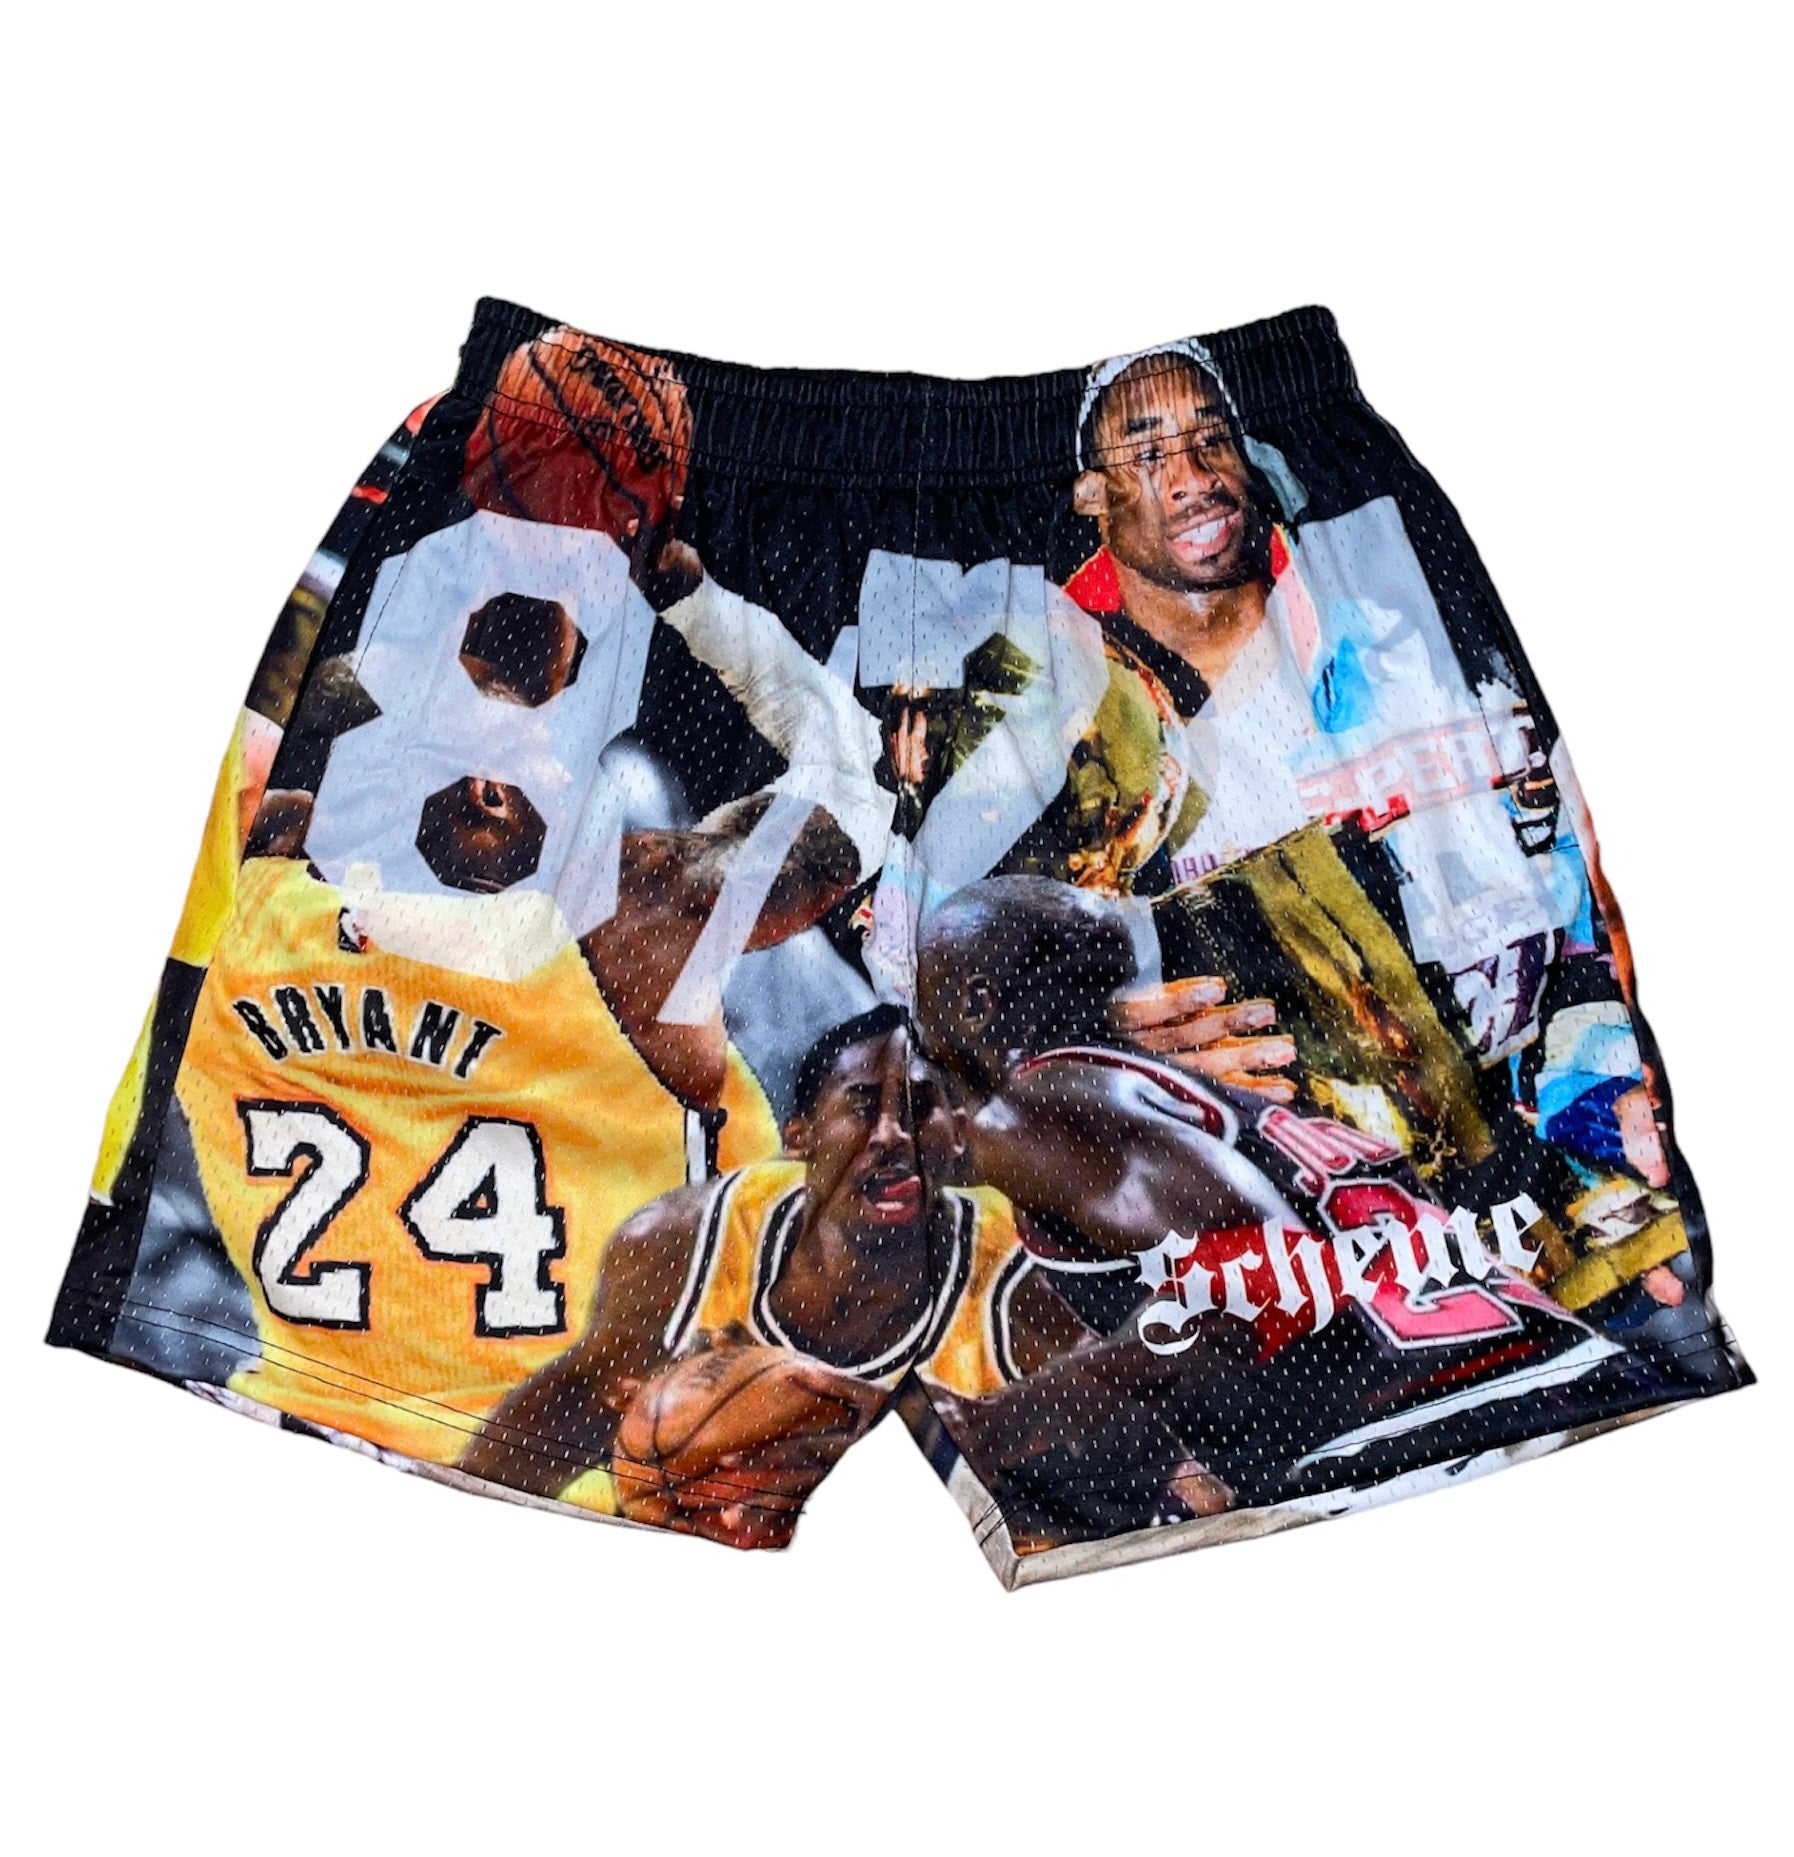 Men's graphic mesh shorts with a picture of kobe bryant michael jordan